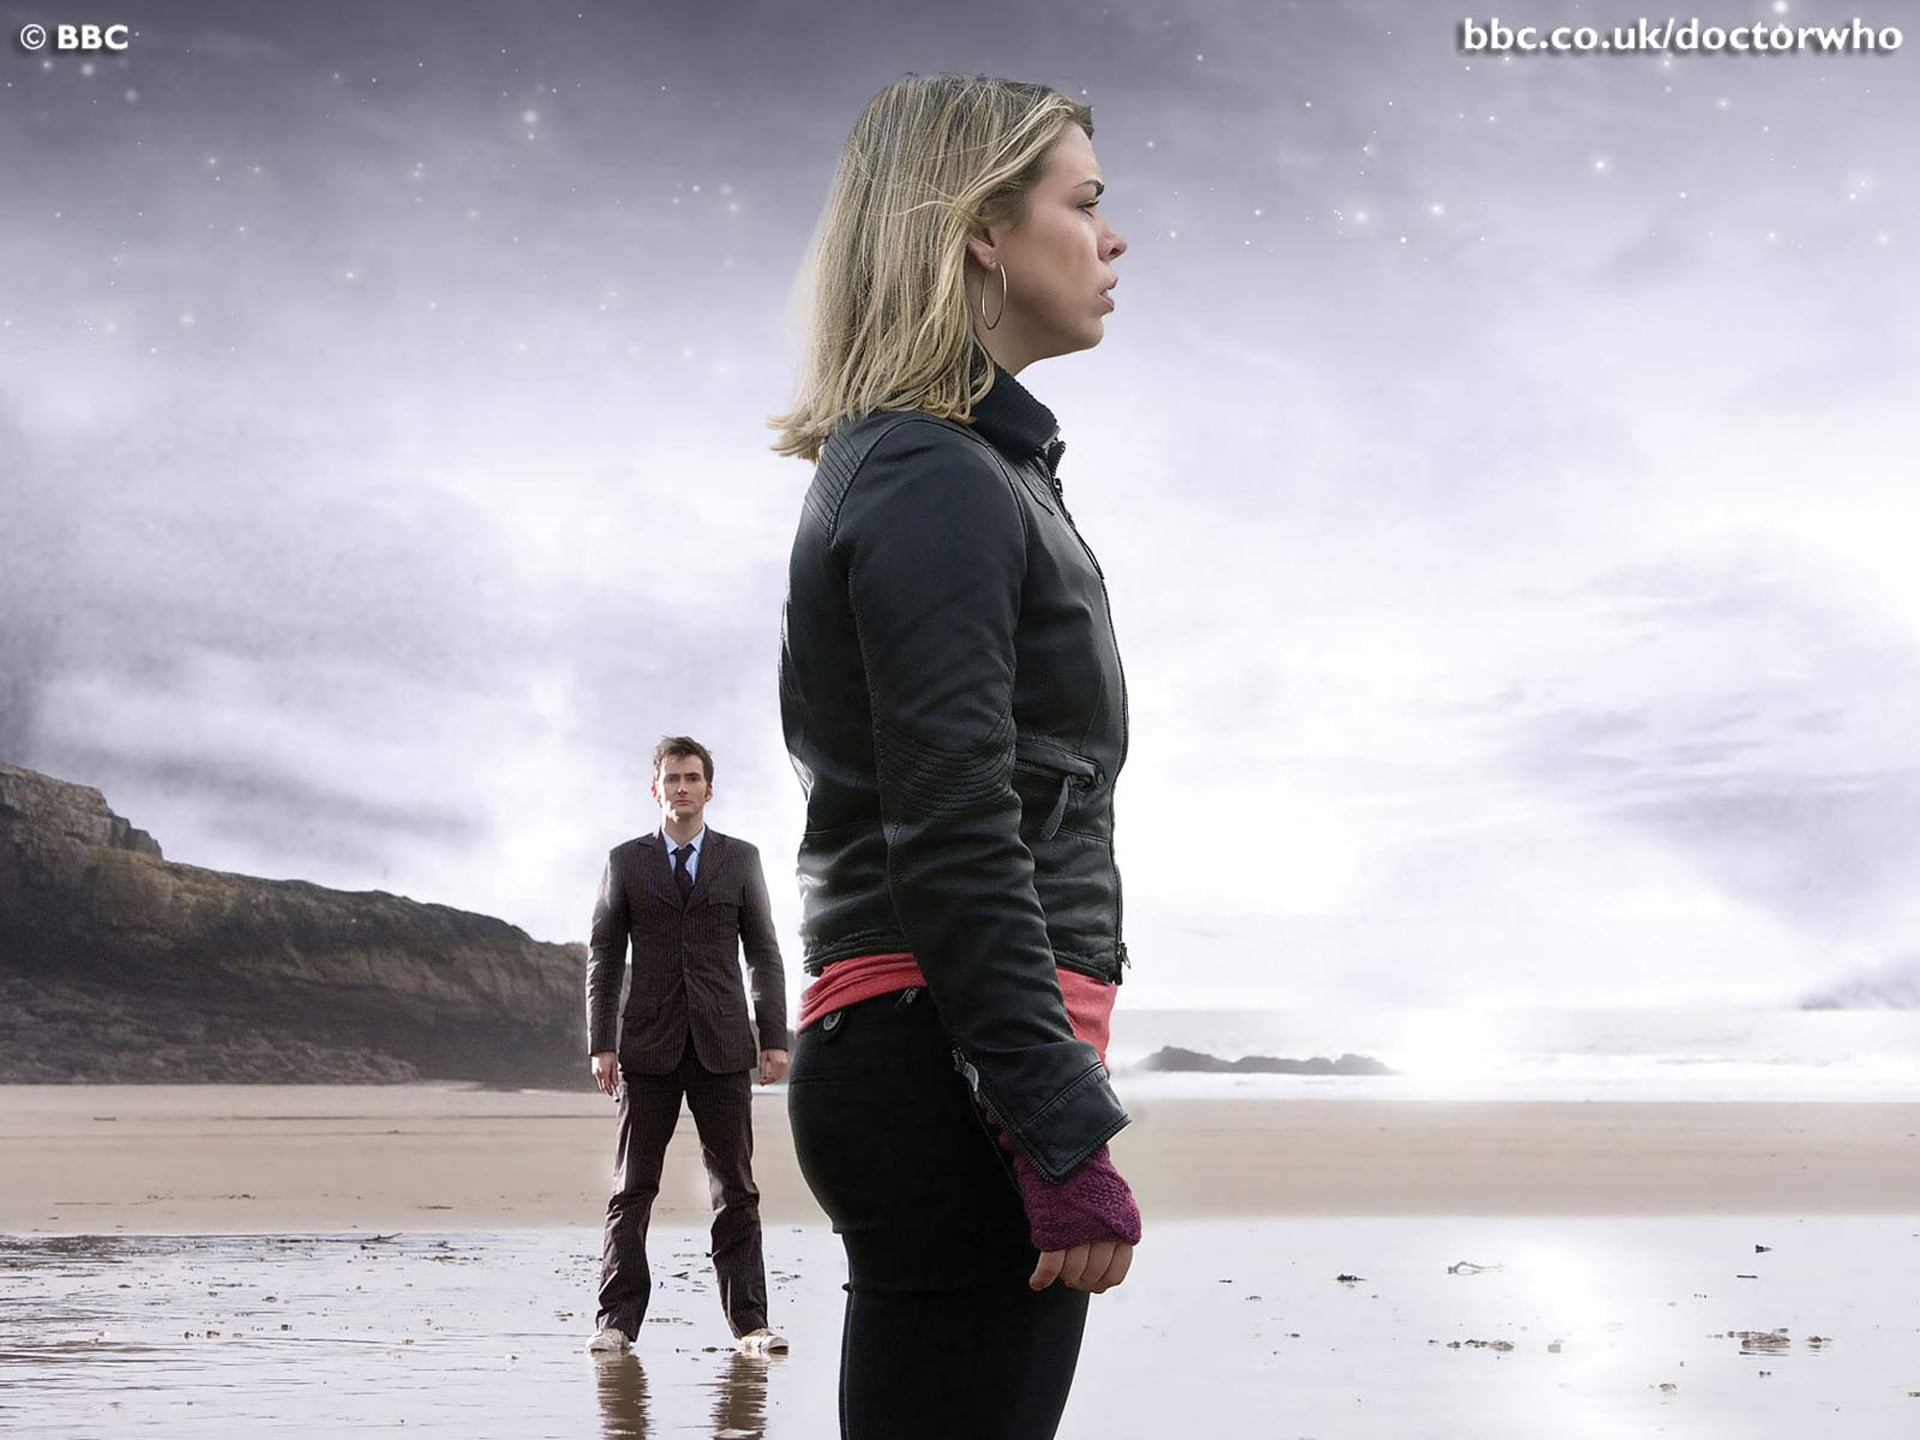 Doctor Who, David Tennant, Billie Piper, leather jackets, blonde